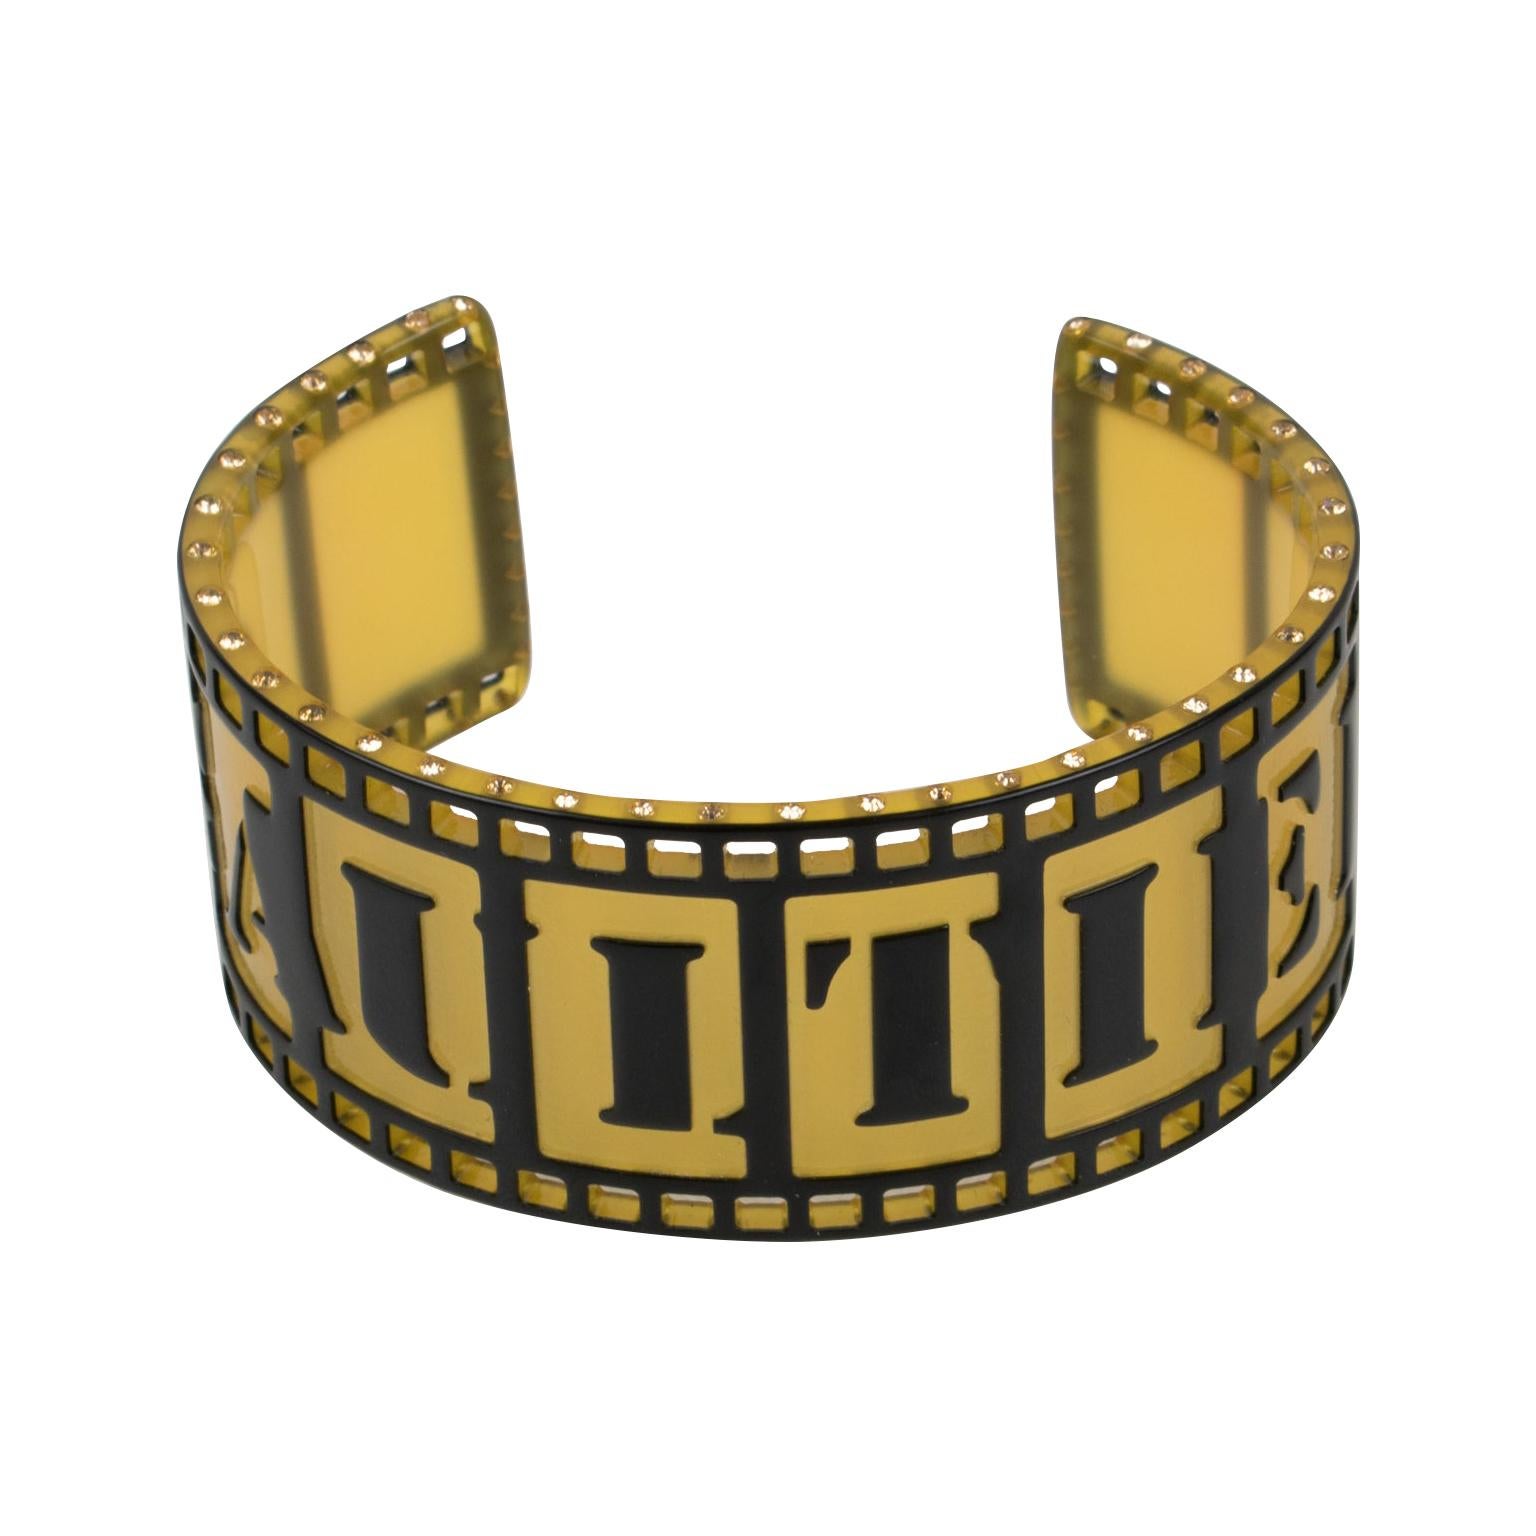 This striking Jean Paul Gaultier Paris resin cuff bracelet features an old-fashioned film strip design with carving and see-thru pattern with wide 